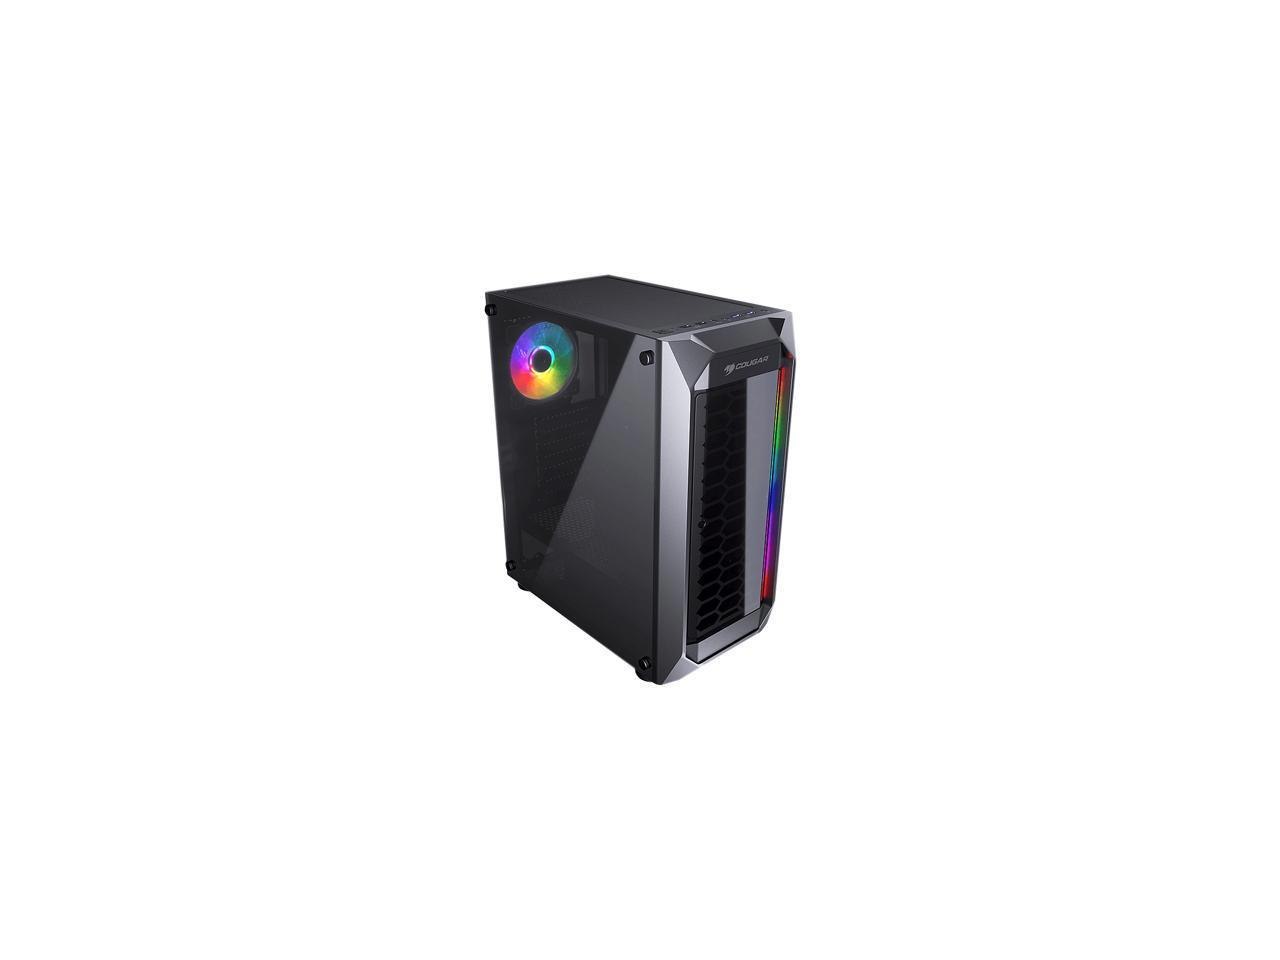 Cougar MX410 Black Atx Mid Tower Powerful And Compact Mid-Tower Case With Dual RGB Strips